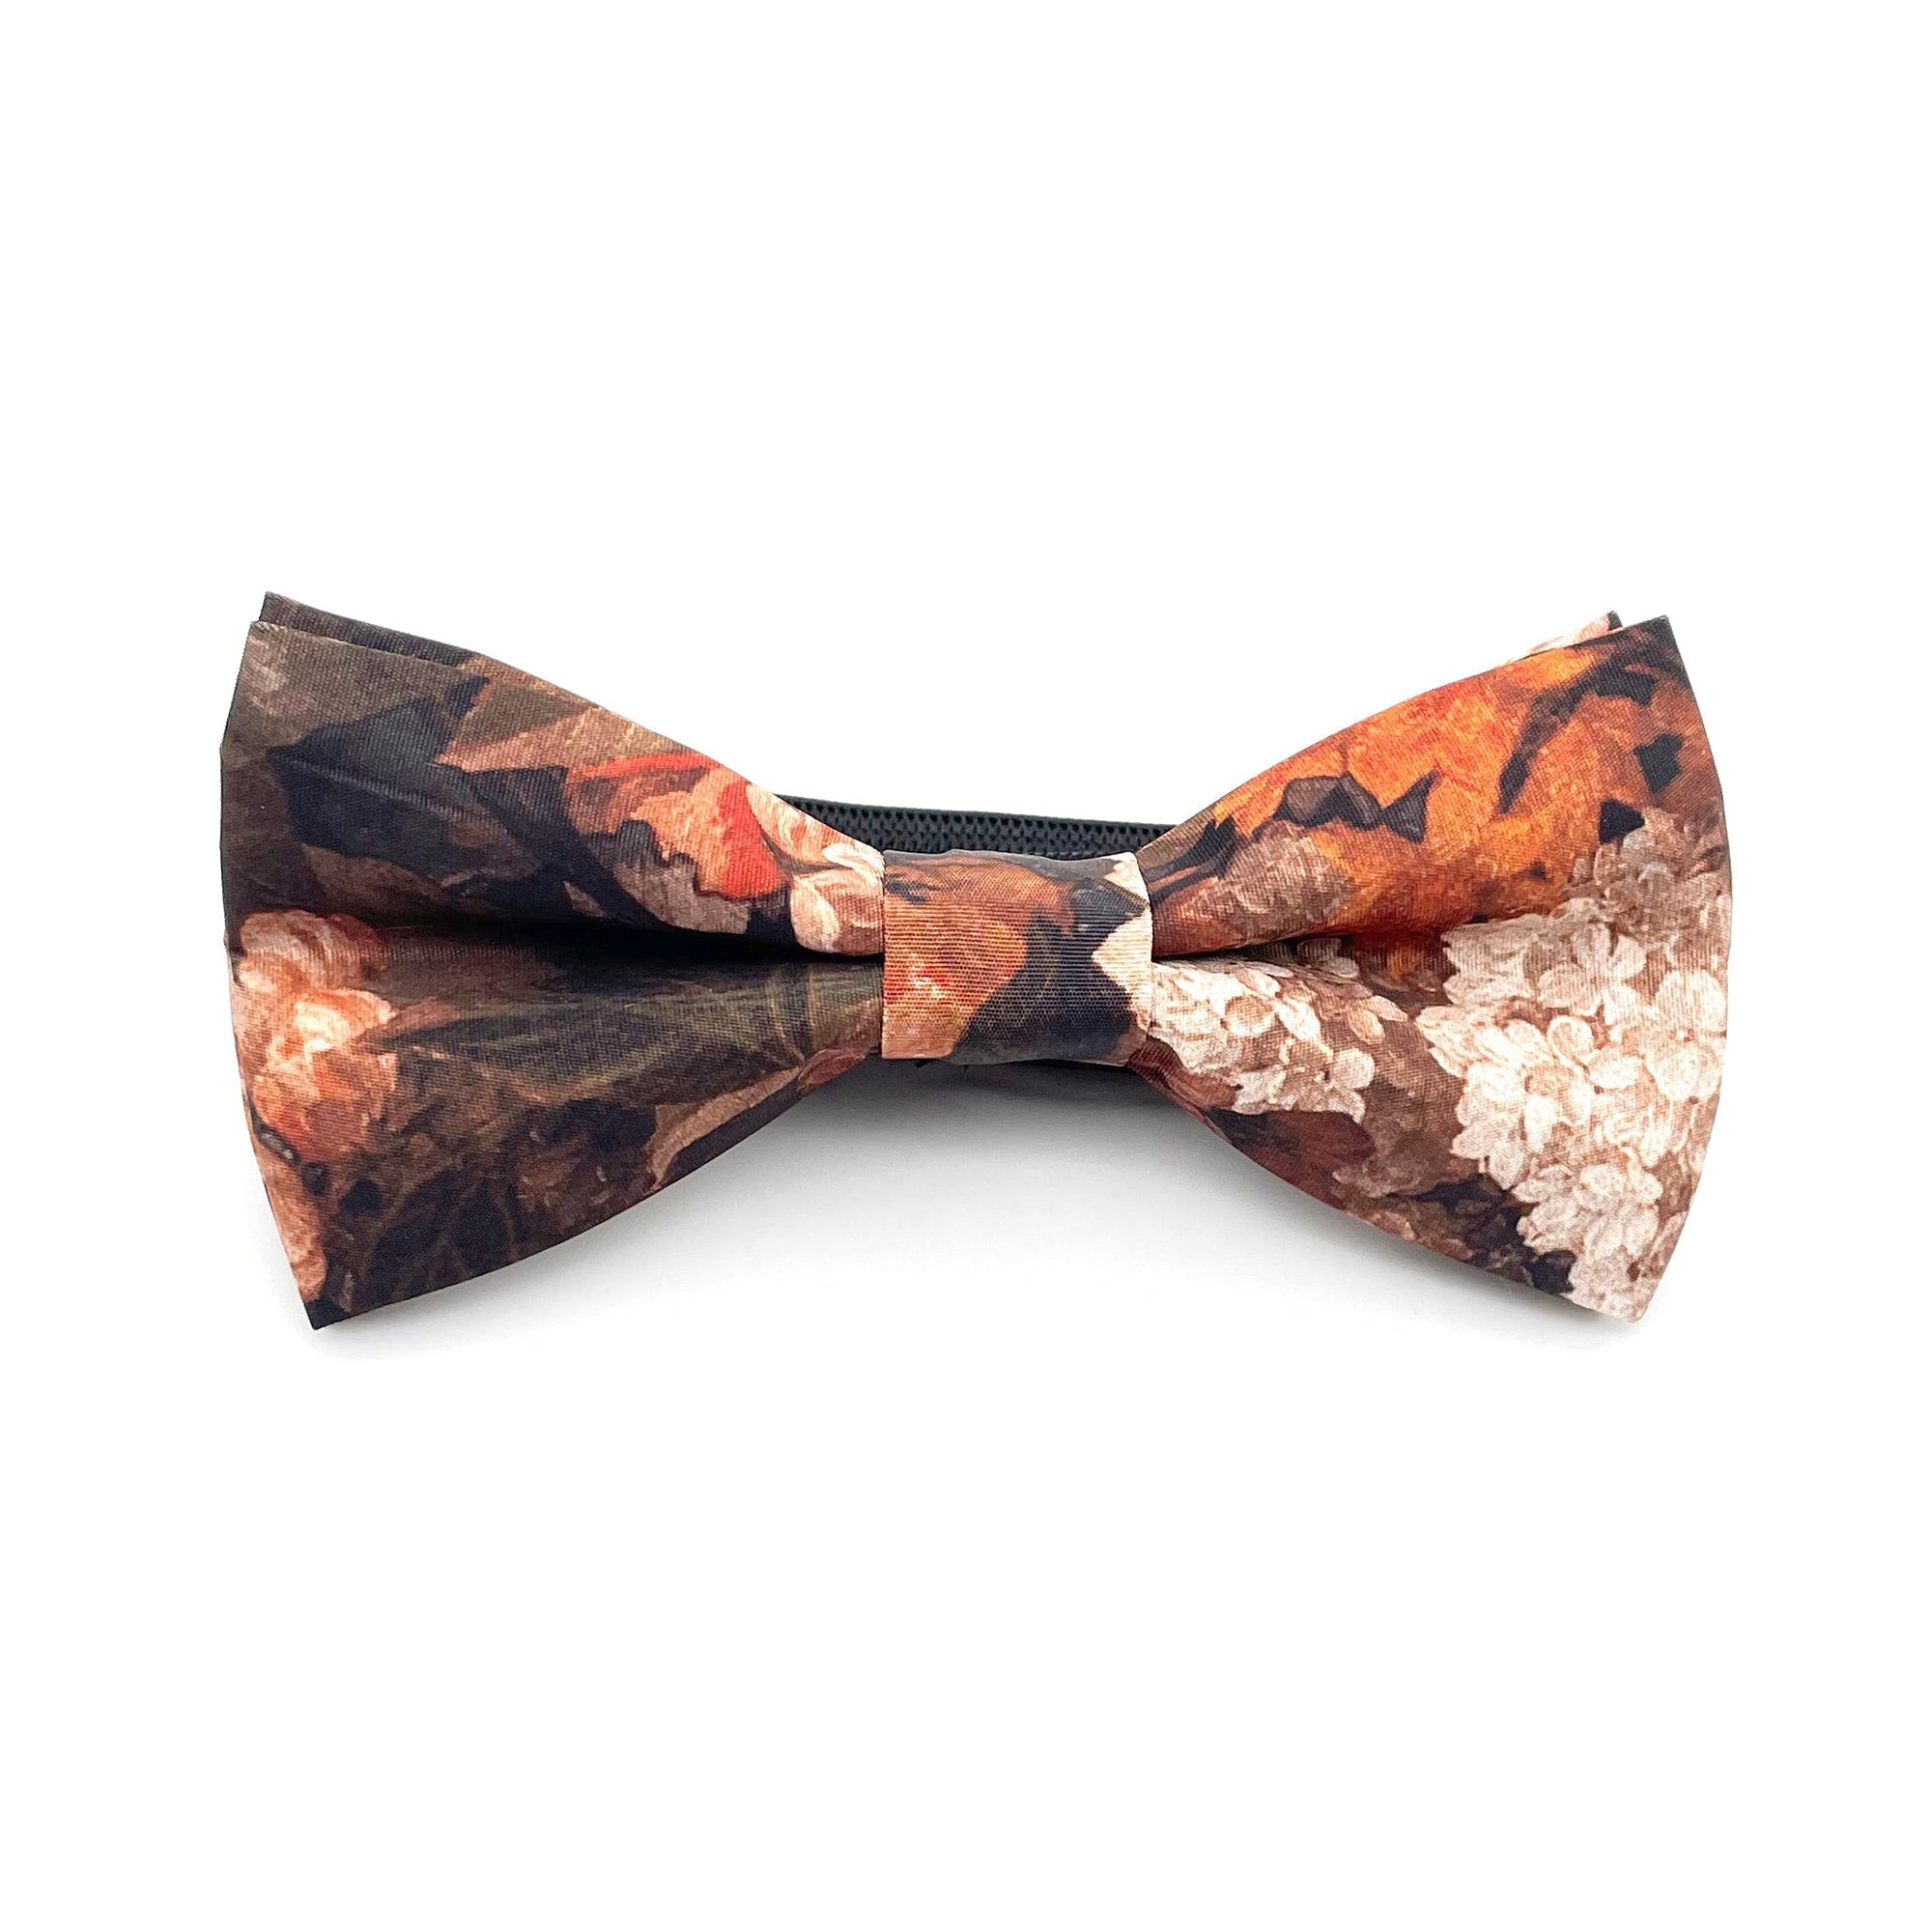 Kids Floral Bow Tie Pre-Tied THEOPHILUS-Kids Floral Bow Tie Pre-Tied Color: Black Base Strap is adjustablePre-Tied bowtieBow Tie 10.5 * 6CM Great for Ring Bearer Photo shoots Photo sessions Wedding Attendant Fits toddlers and babies. Theophilus infant baby bow tie toddler bow tie floral for wedding and events groom groomsmen flower bow tie mytieshop ring bearer page boy bow tie white bow tie white and blue tie kids bowtie floral Adjustable wedding attire for toddler and children floral print tie